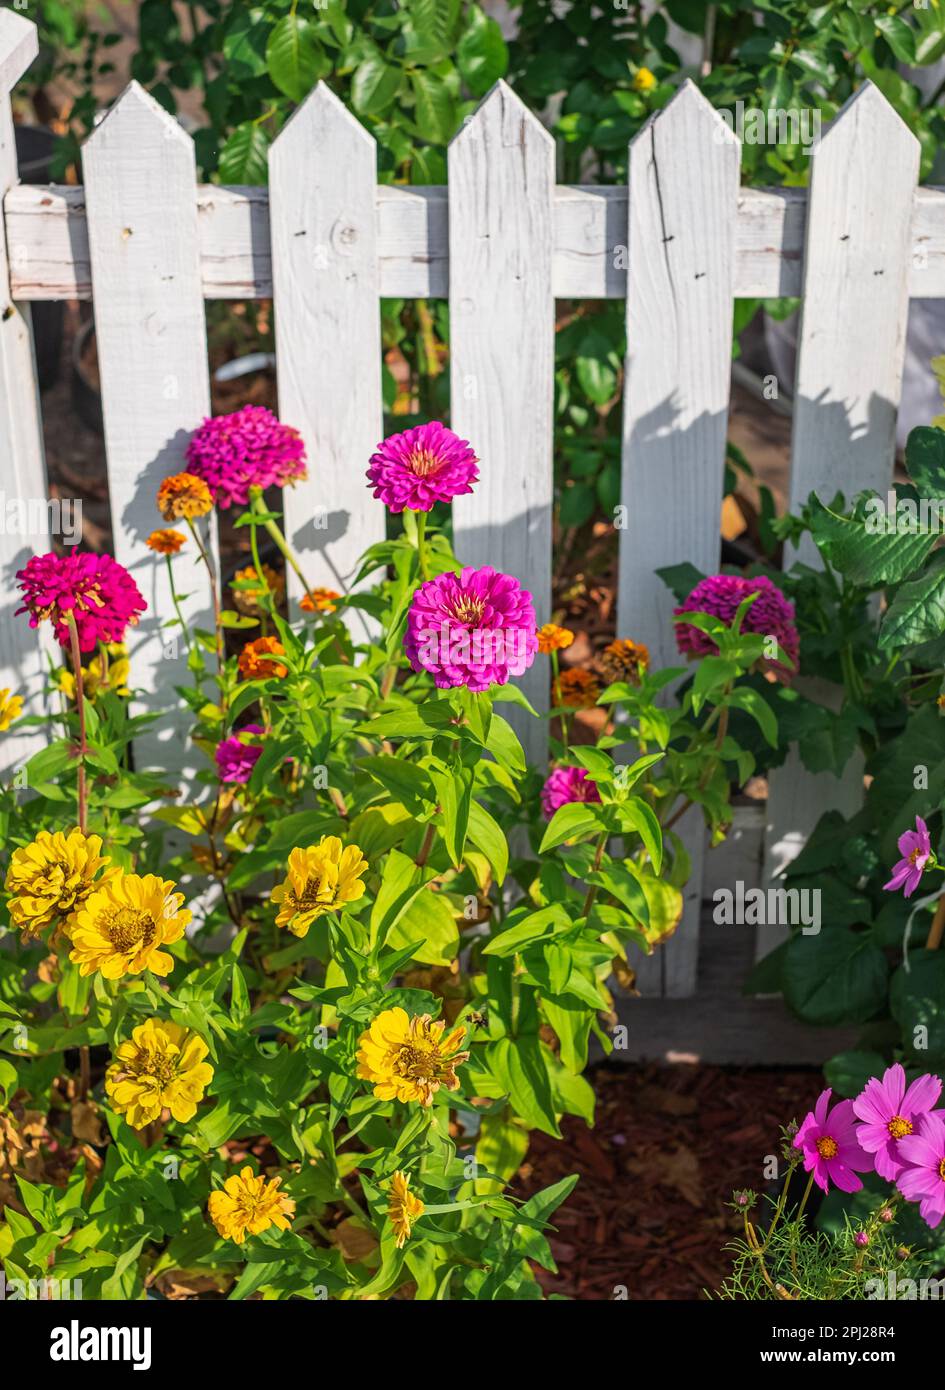 Pink and yellow flowers against white wooden garden fence of a residential house in suburb. Colorful flowers in the garden on sunny day. Street photo, Stock Photo